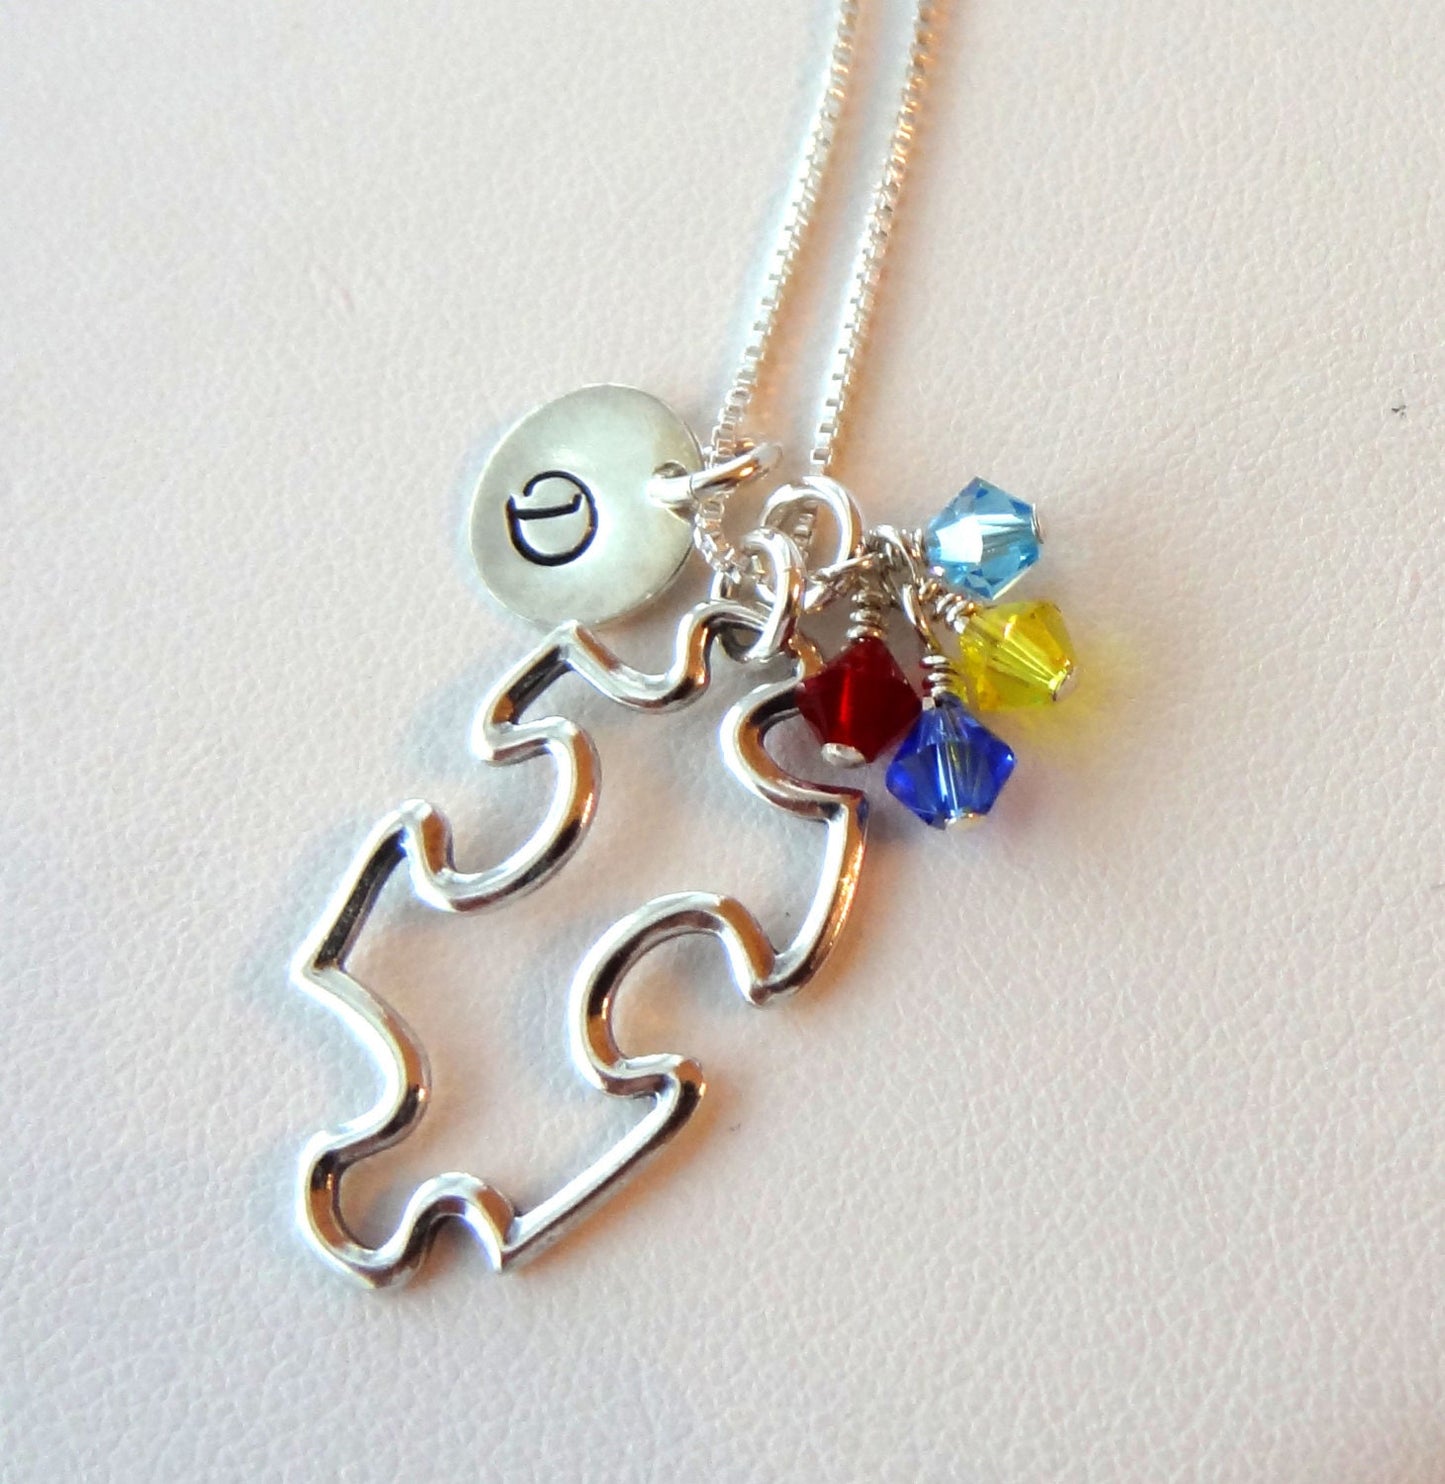 Sterling Silver Puzzle Piece Necklace, Sterling Silver Puzzle Jewelry, Autism Necklace, Autism Awareness, Perzonalized Puzzle Necklace